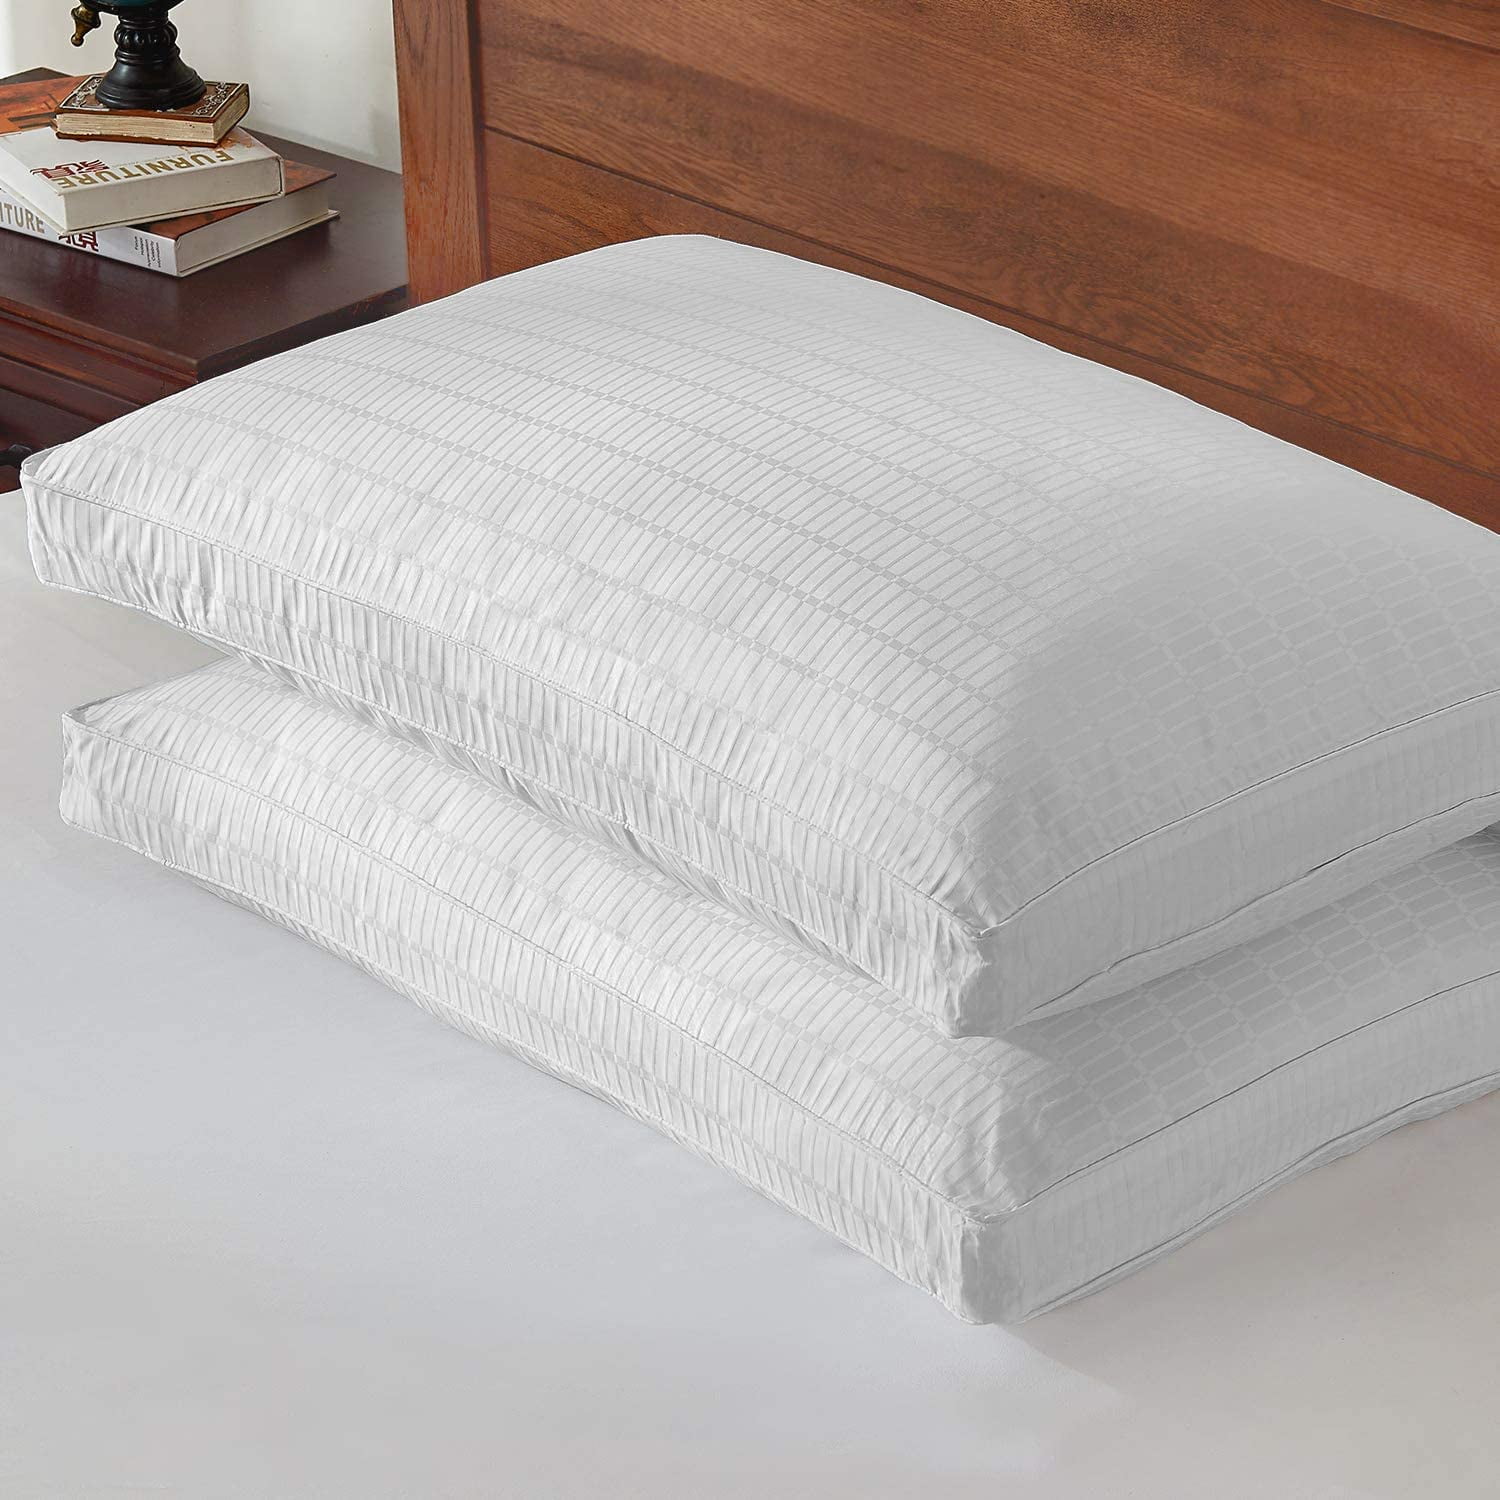 1000TC The Finest100% Cotton Down Feather Pillows Queen Size Set of 2 